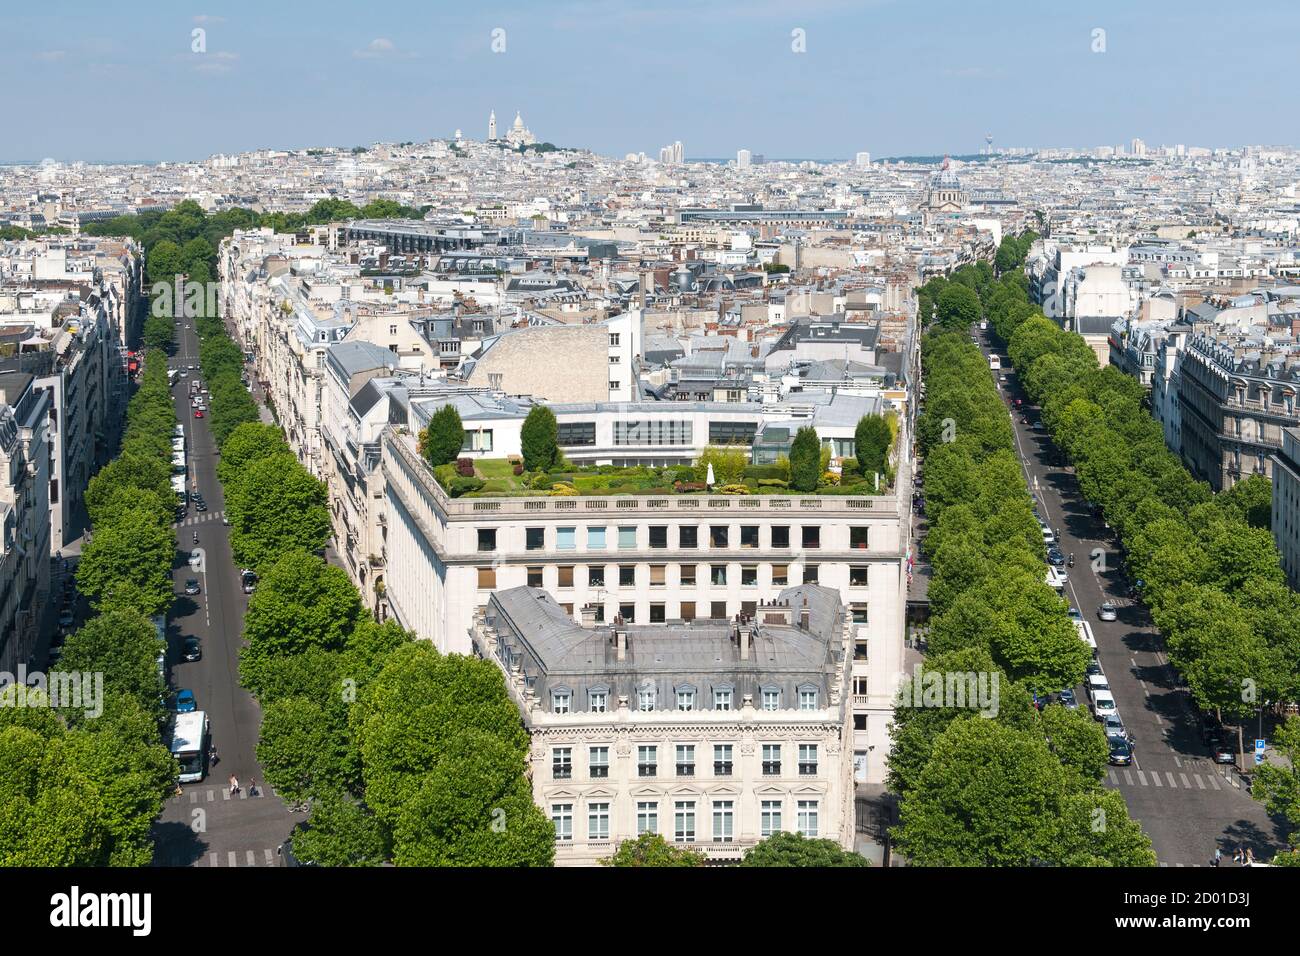 View across Paris from the top of the Arc De Triomphe. Avenue de Friedland runs on the right side and Avenue Hoche runs on the left side of the image. Stock Photo